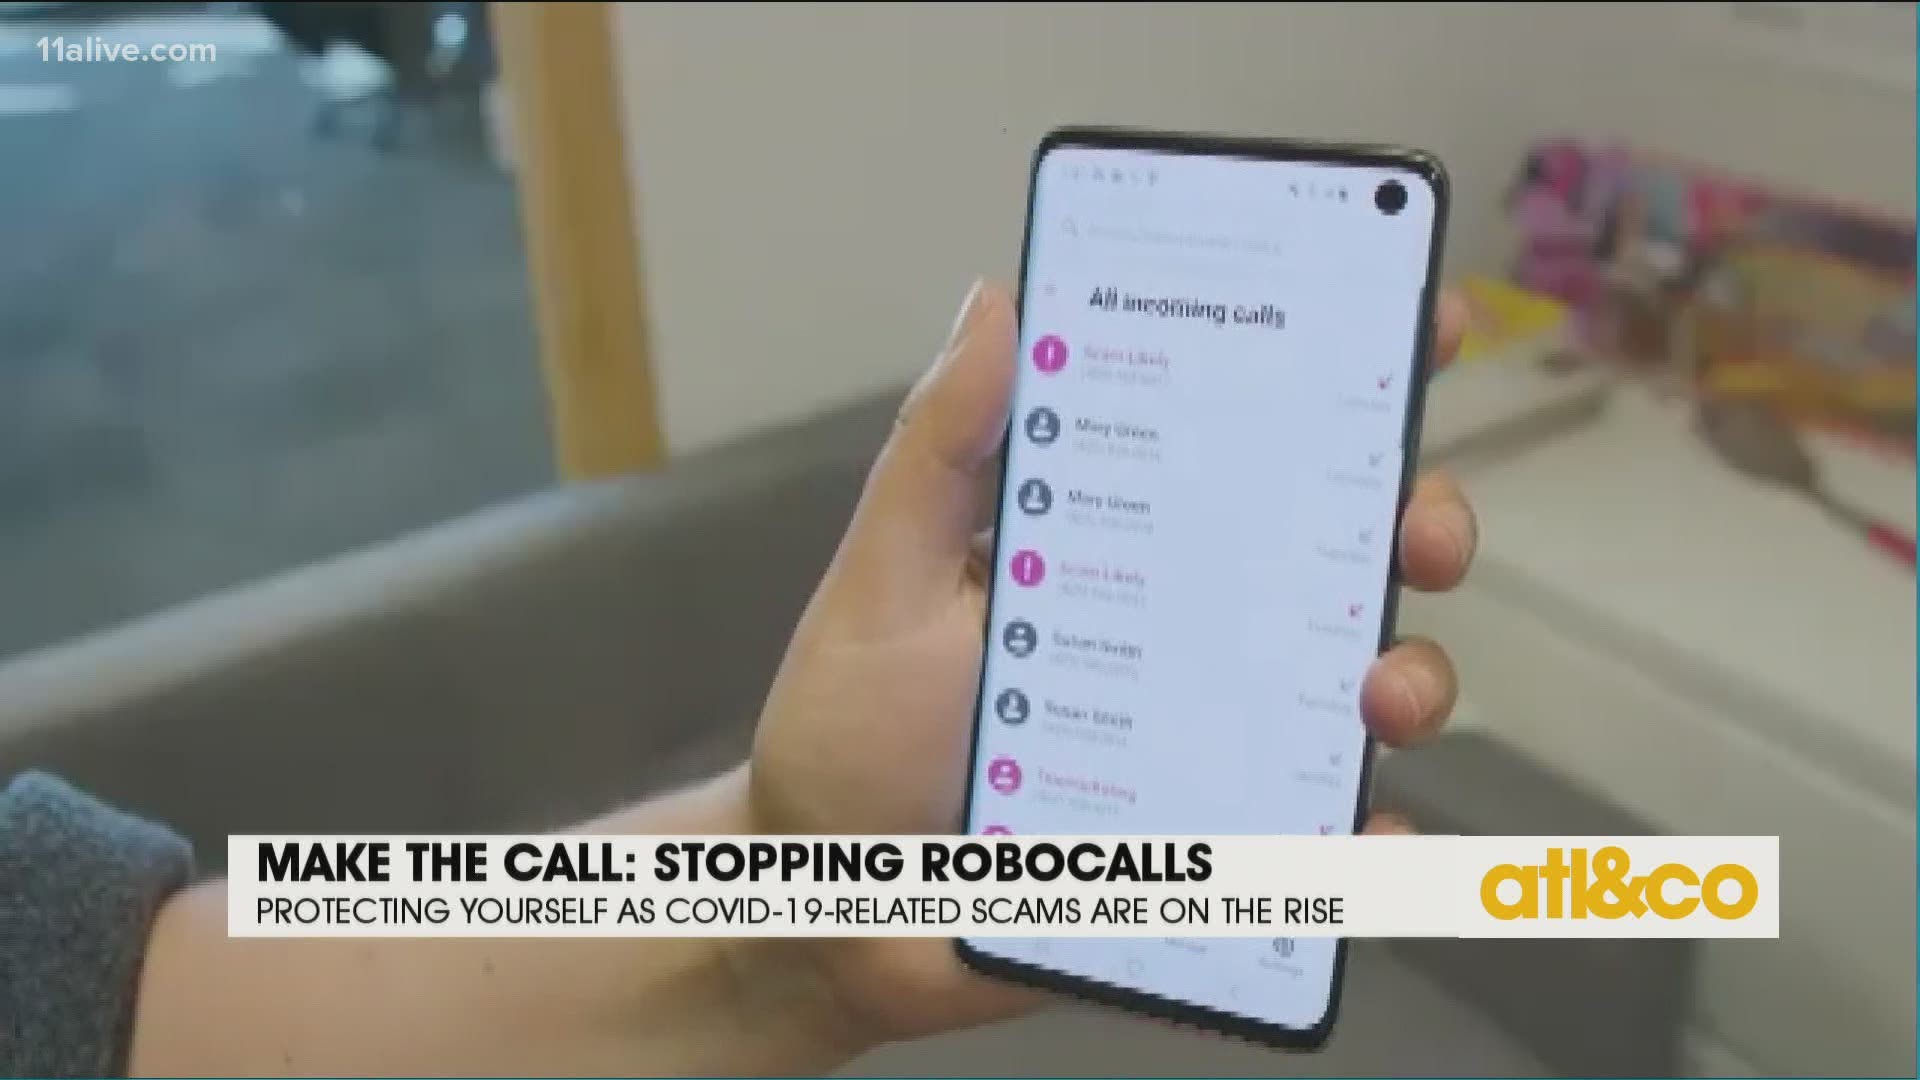 Protect yourself as COVID-related robocall scams are on the rise!